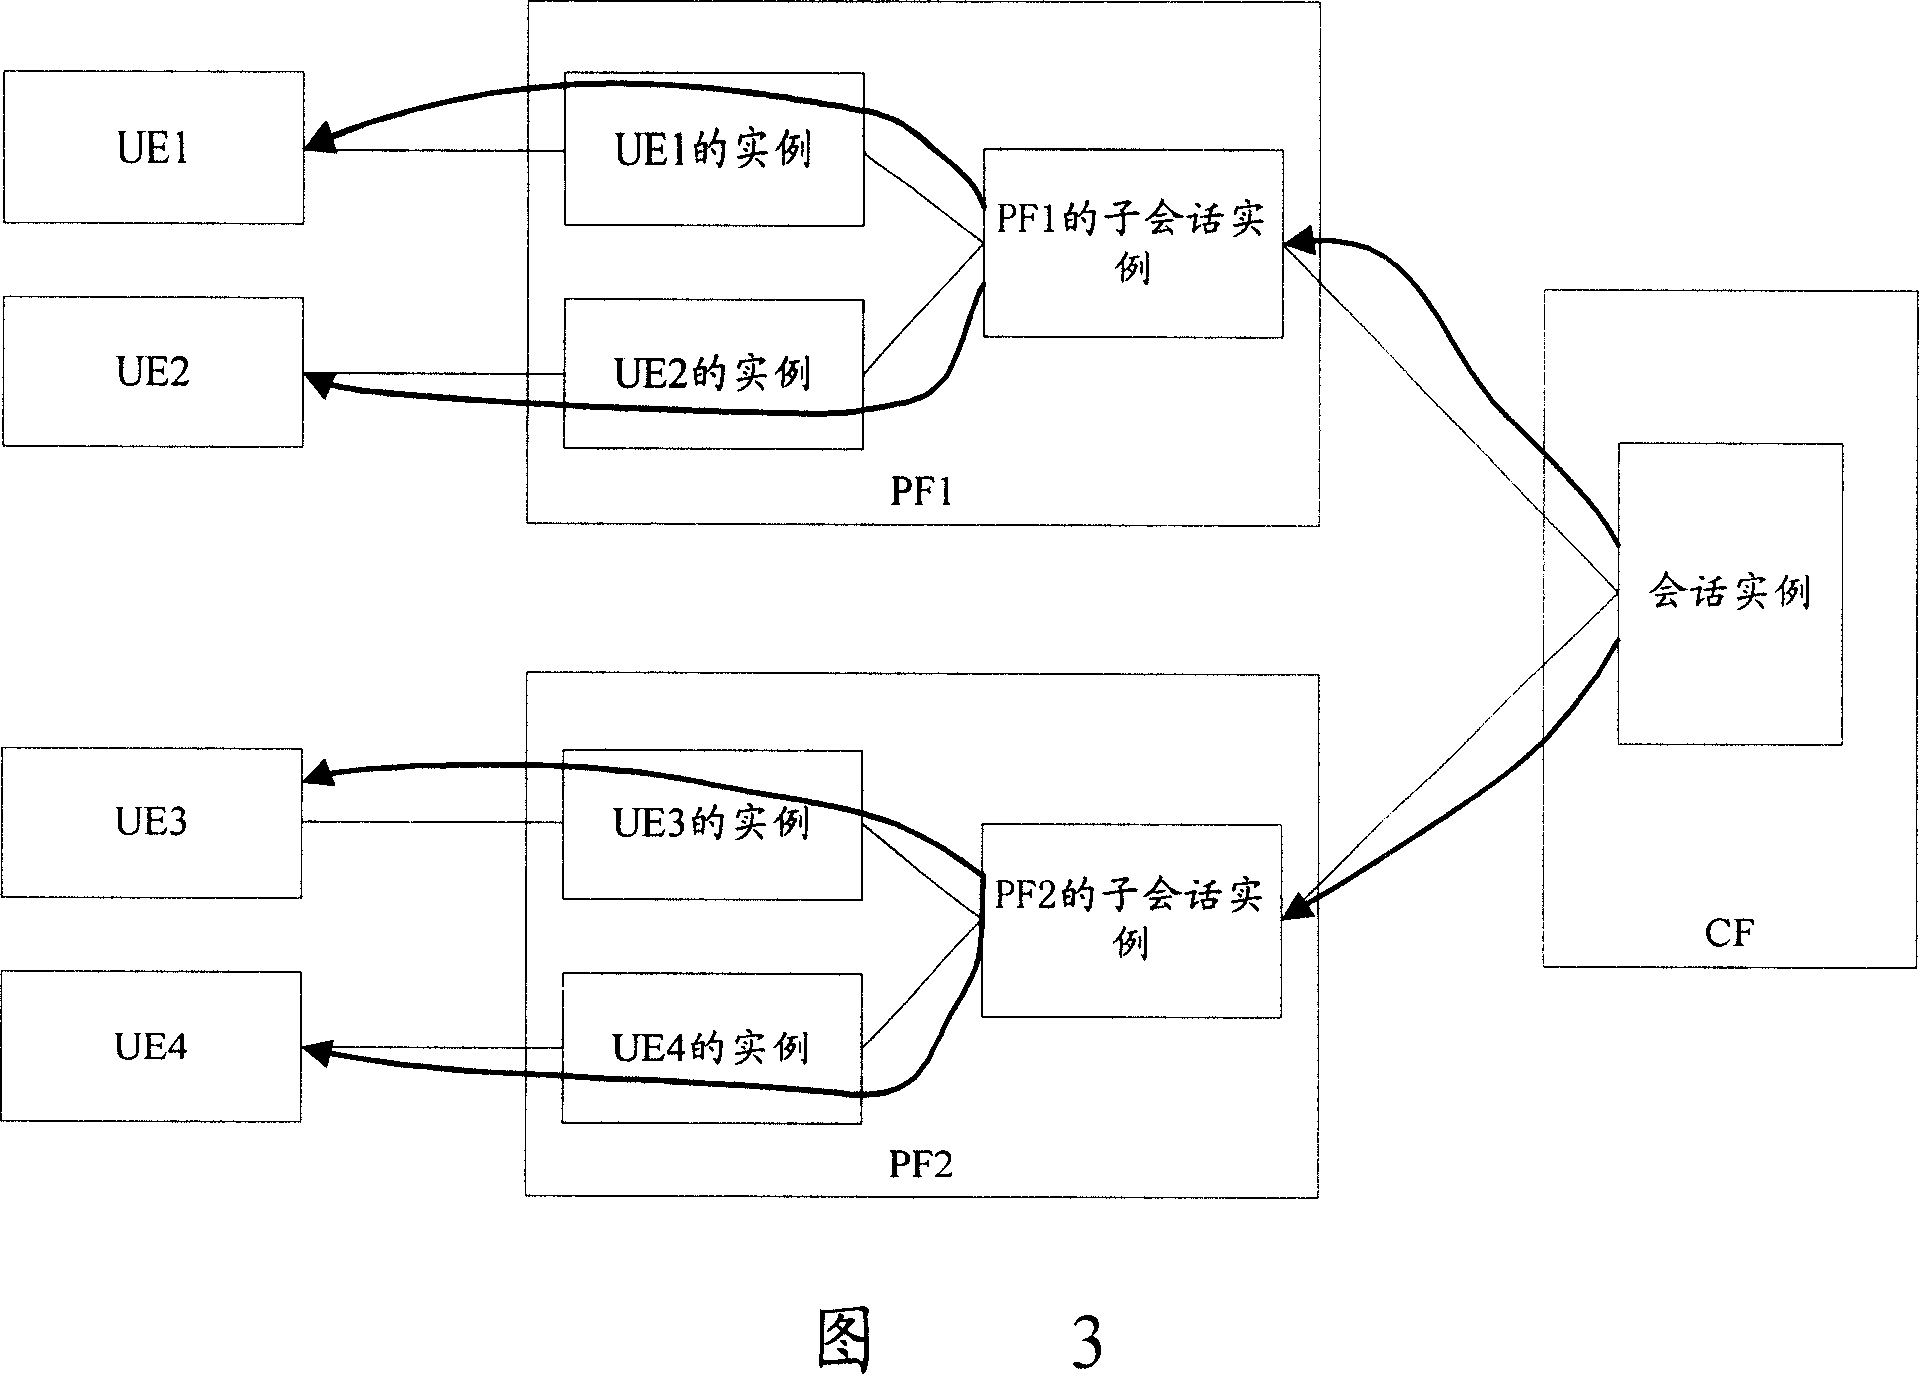 Dialogue control method and system in service of multiparty communication